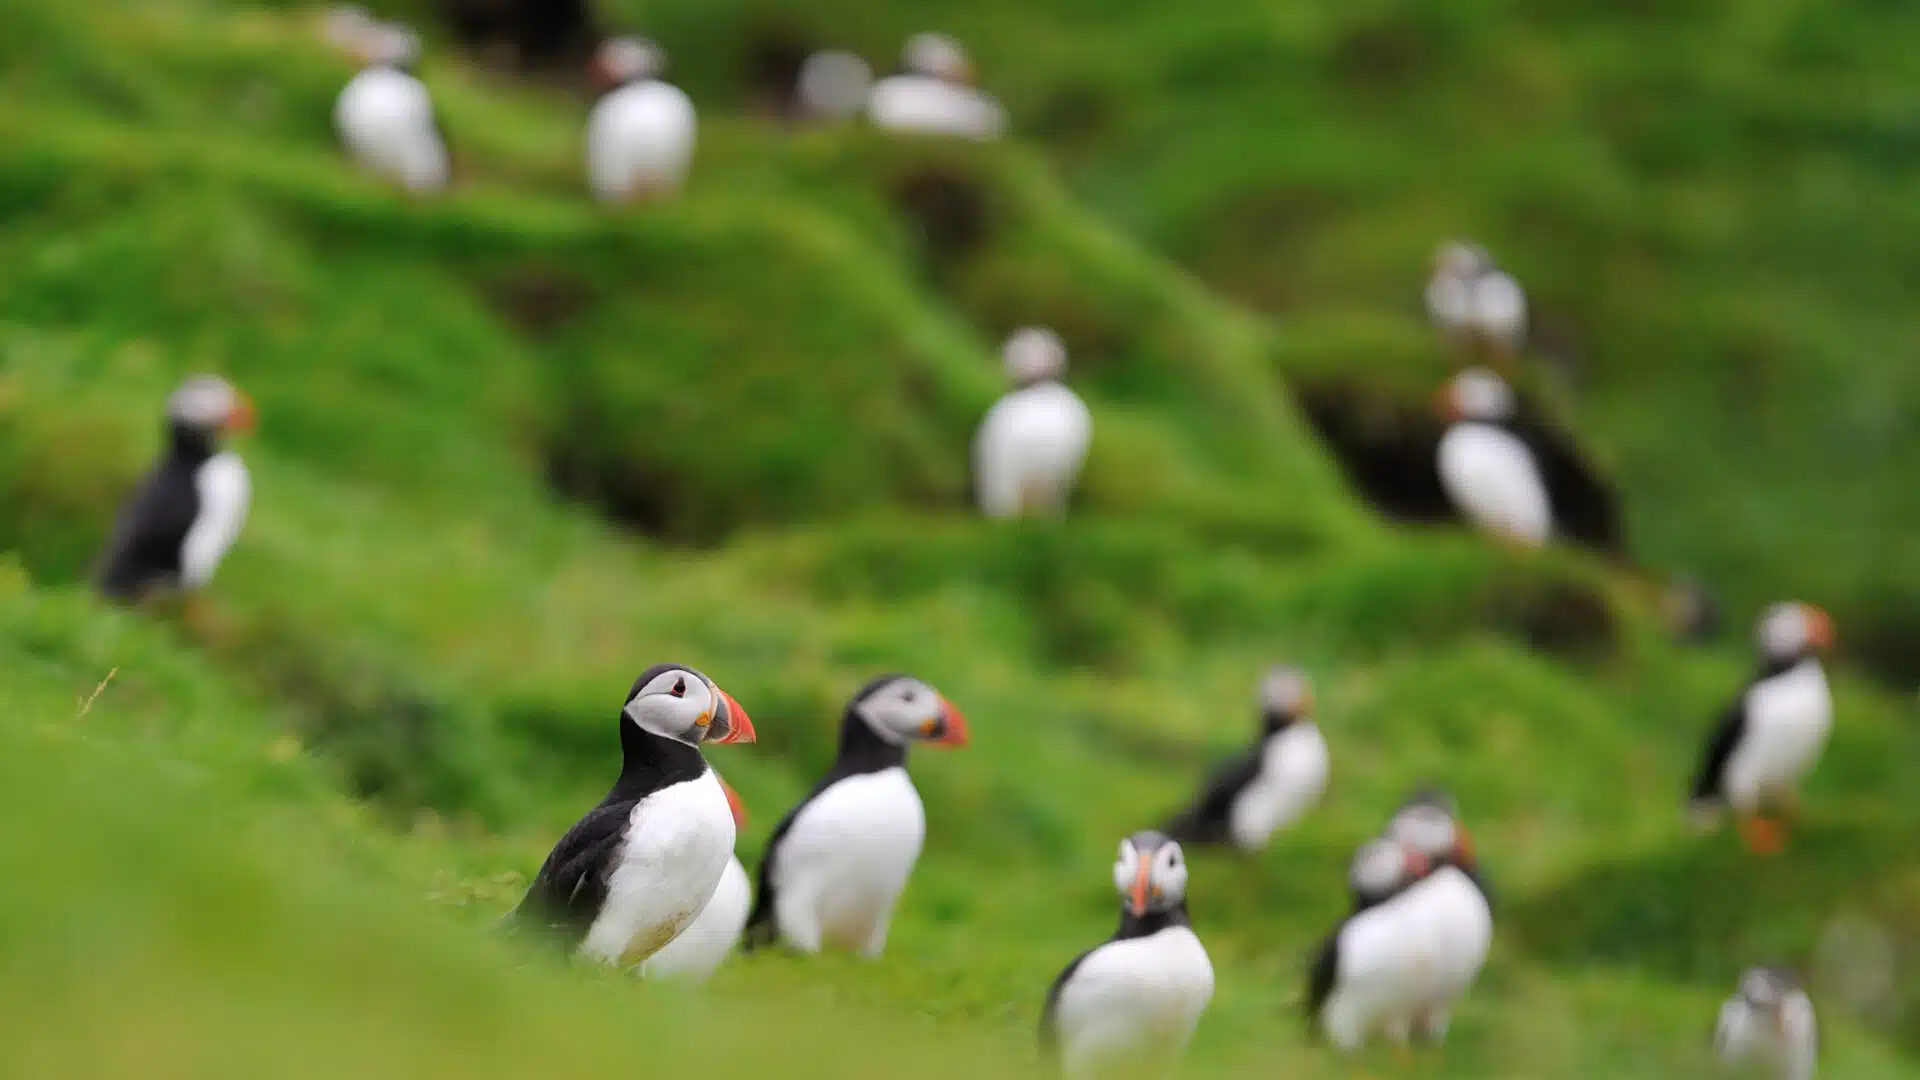 Puffins in Iceland.